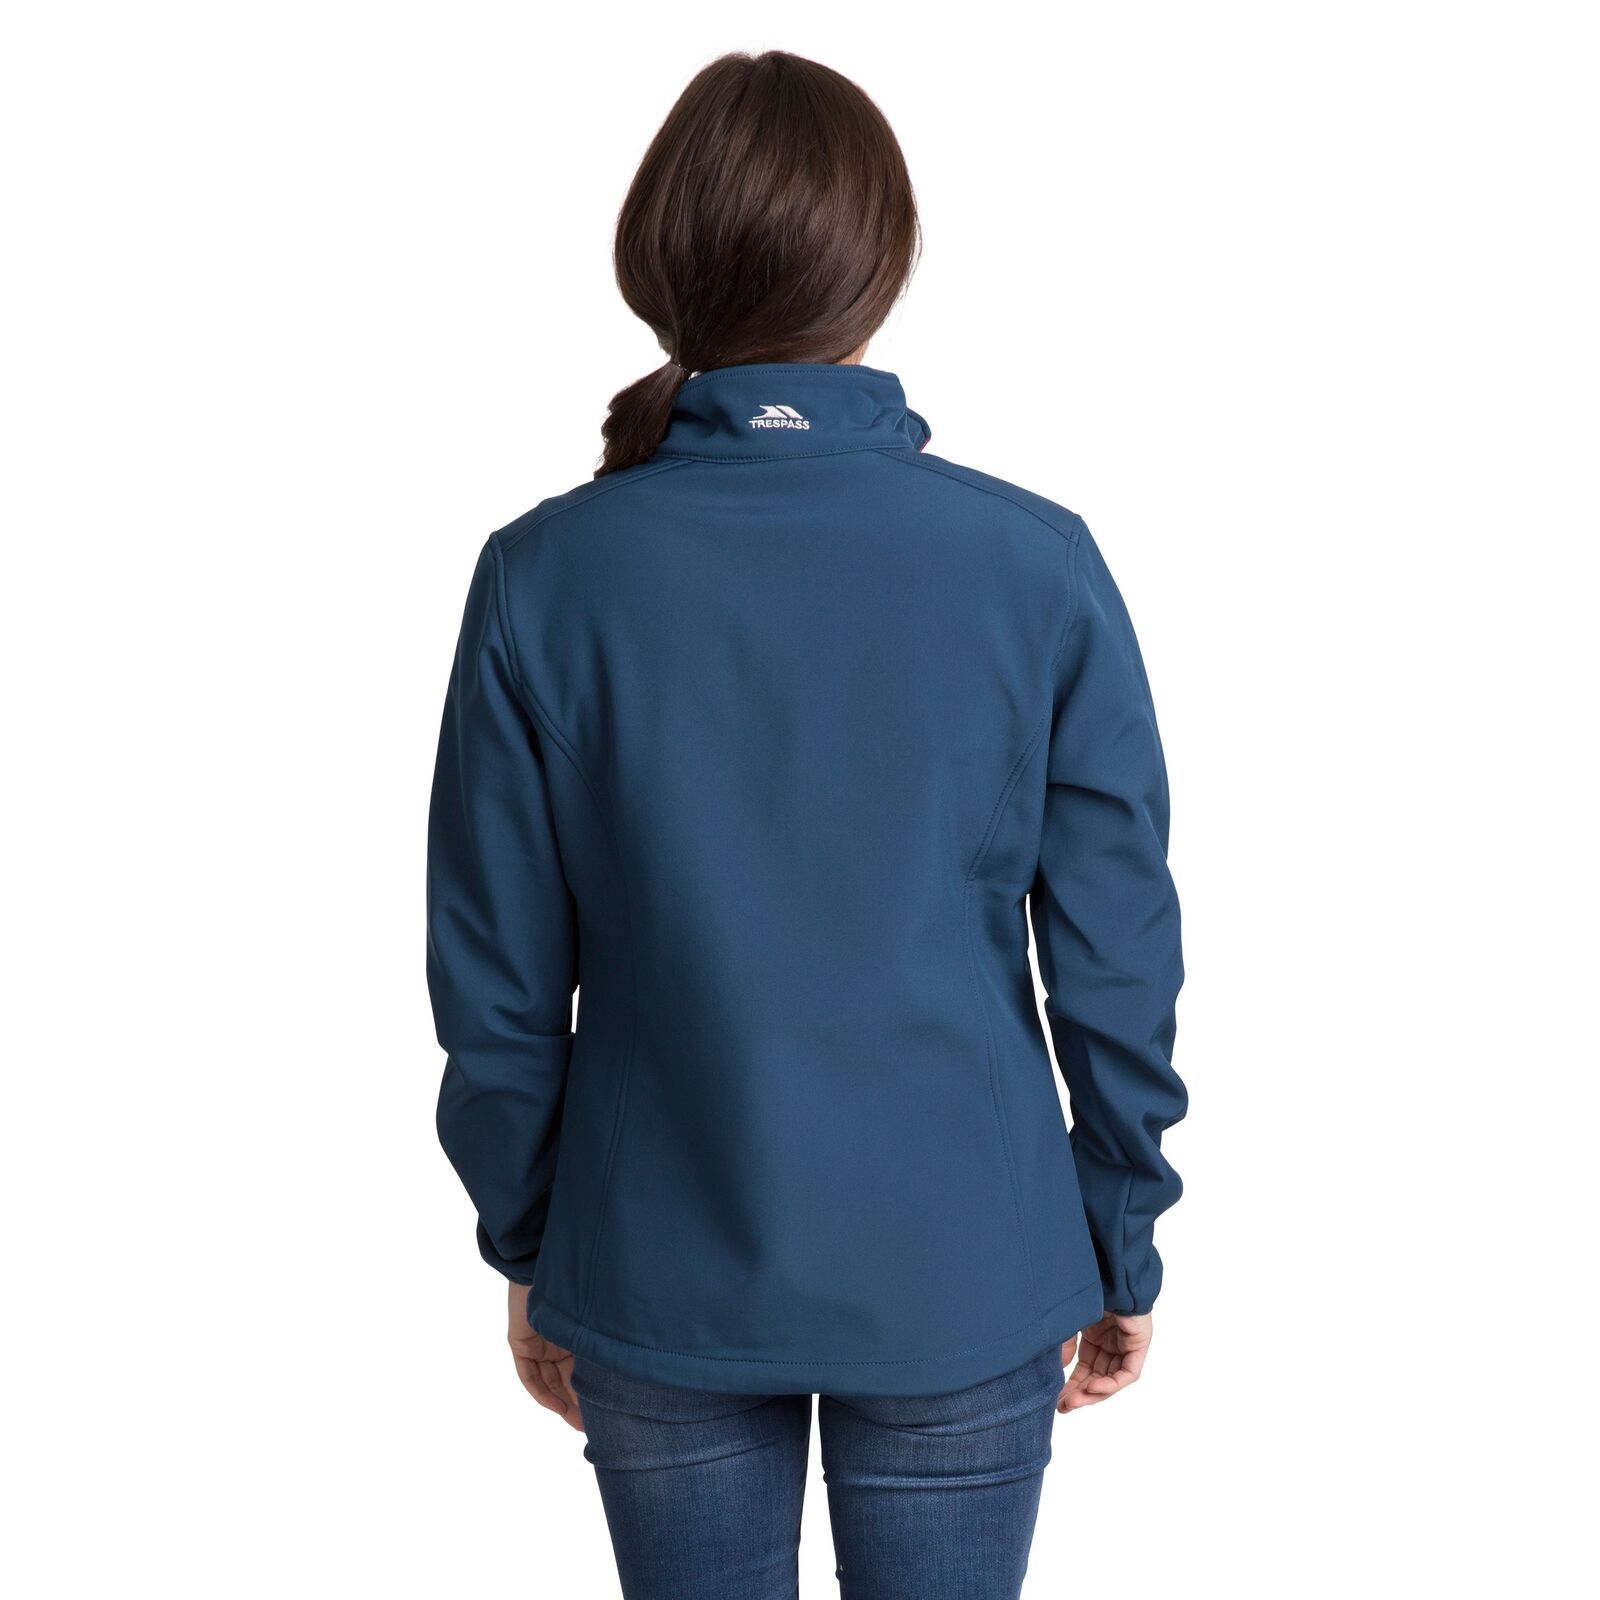 Windproof. Lightweight. 2 Zip Pockets. Drawcord at Hem. Contrast Zips. 94% Polyester, 6% Elastane. Trespass Womens Chest Sizing (approx): XS/8 - 32in/81cm, S/10 - 34in/86cm, M/12 - 36in/91.4cm, L/14 - 38in/96.5cm, XL/16 - 40in/101.5cm, XXL/18 - 42in/106.5cm.